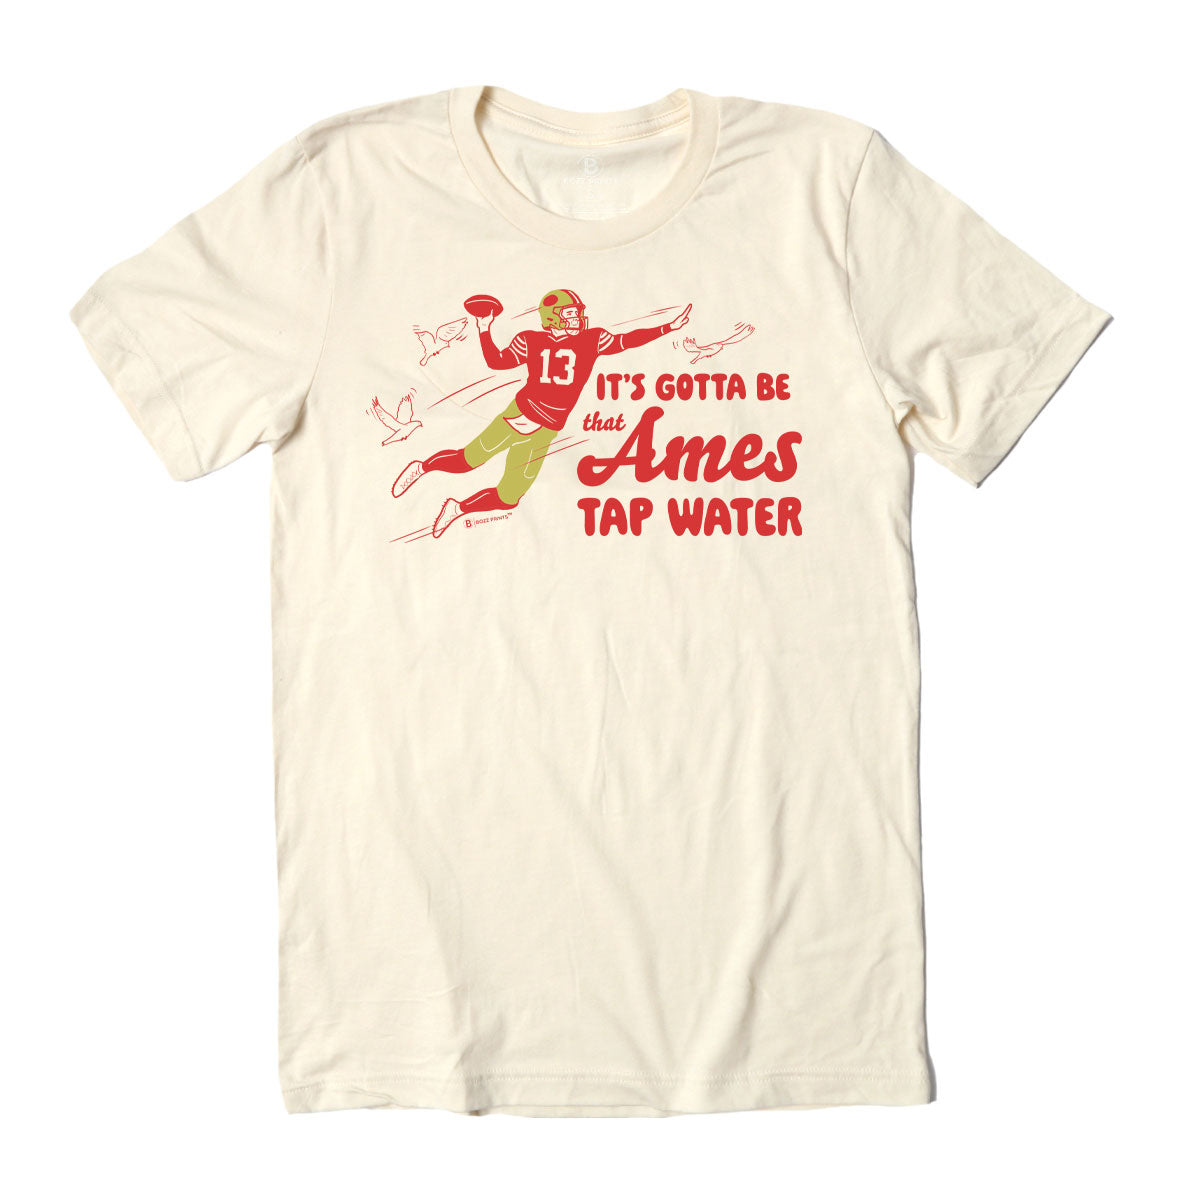 It's Gotta Be That Ames Tap Water T-Shirt